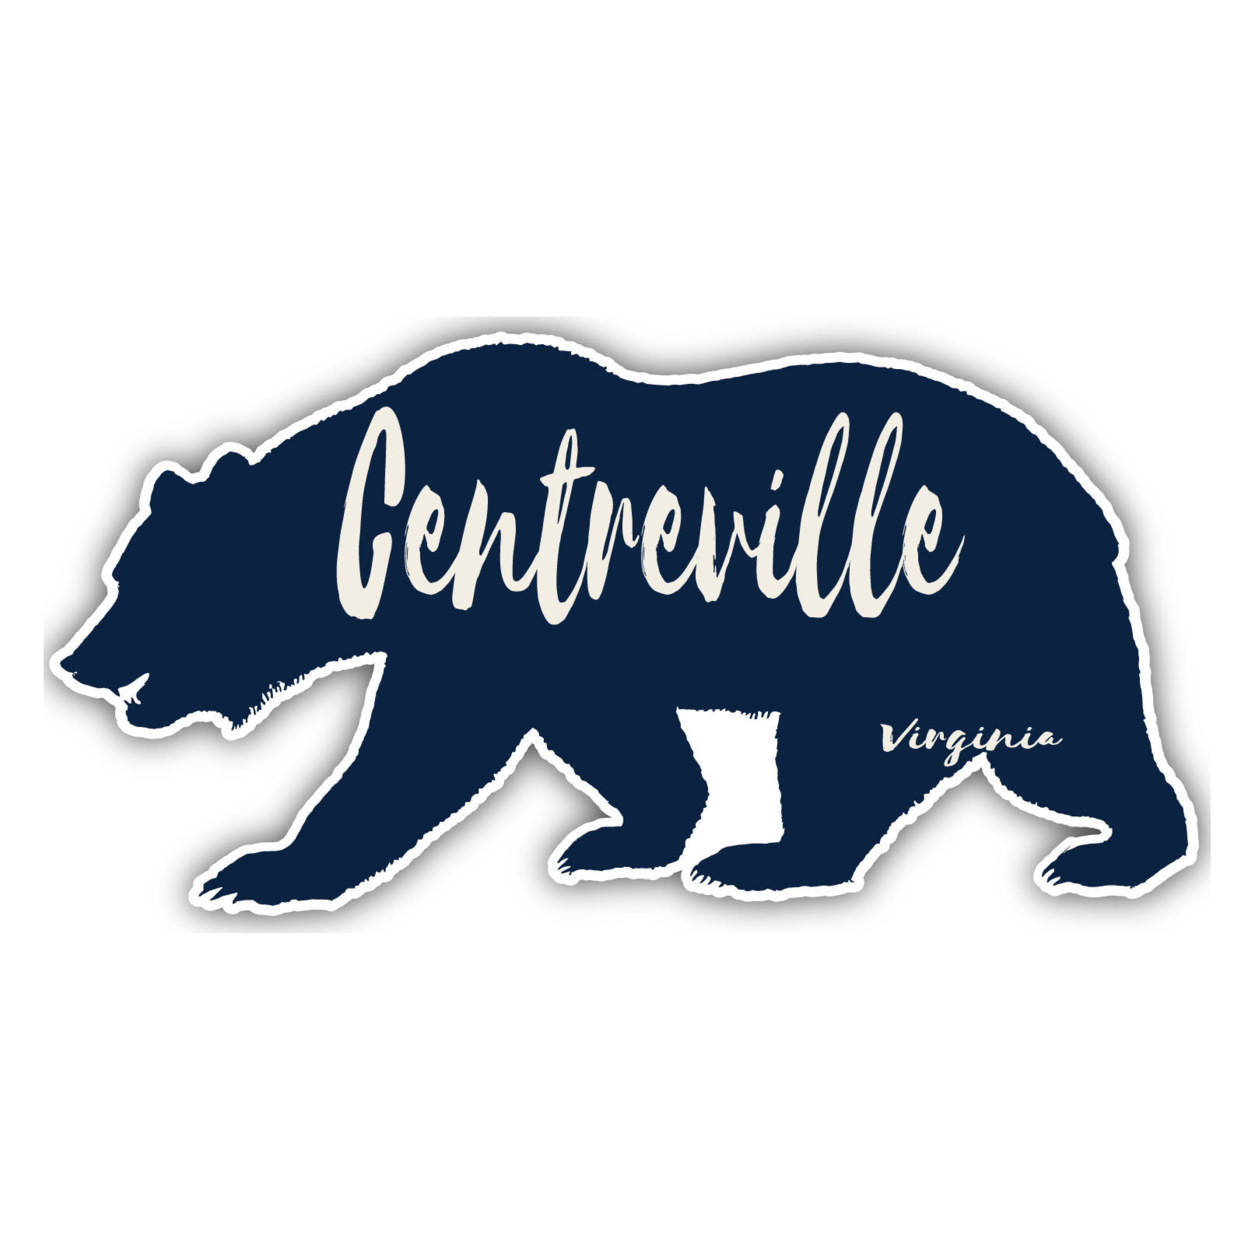 Centreville Virginia Souvenir Decorative Stickers (Choose Theme And Size) - 4-Pack, 2-Inch, Bear